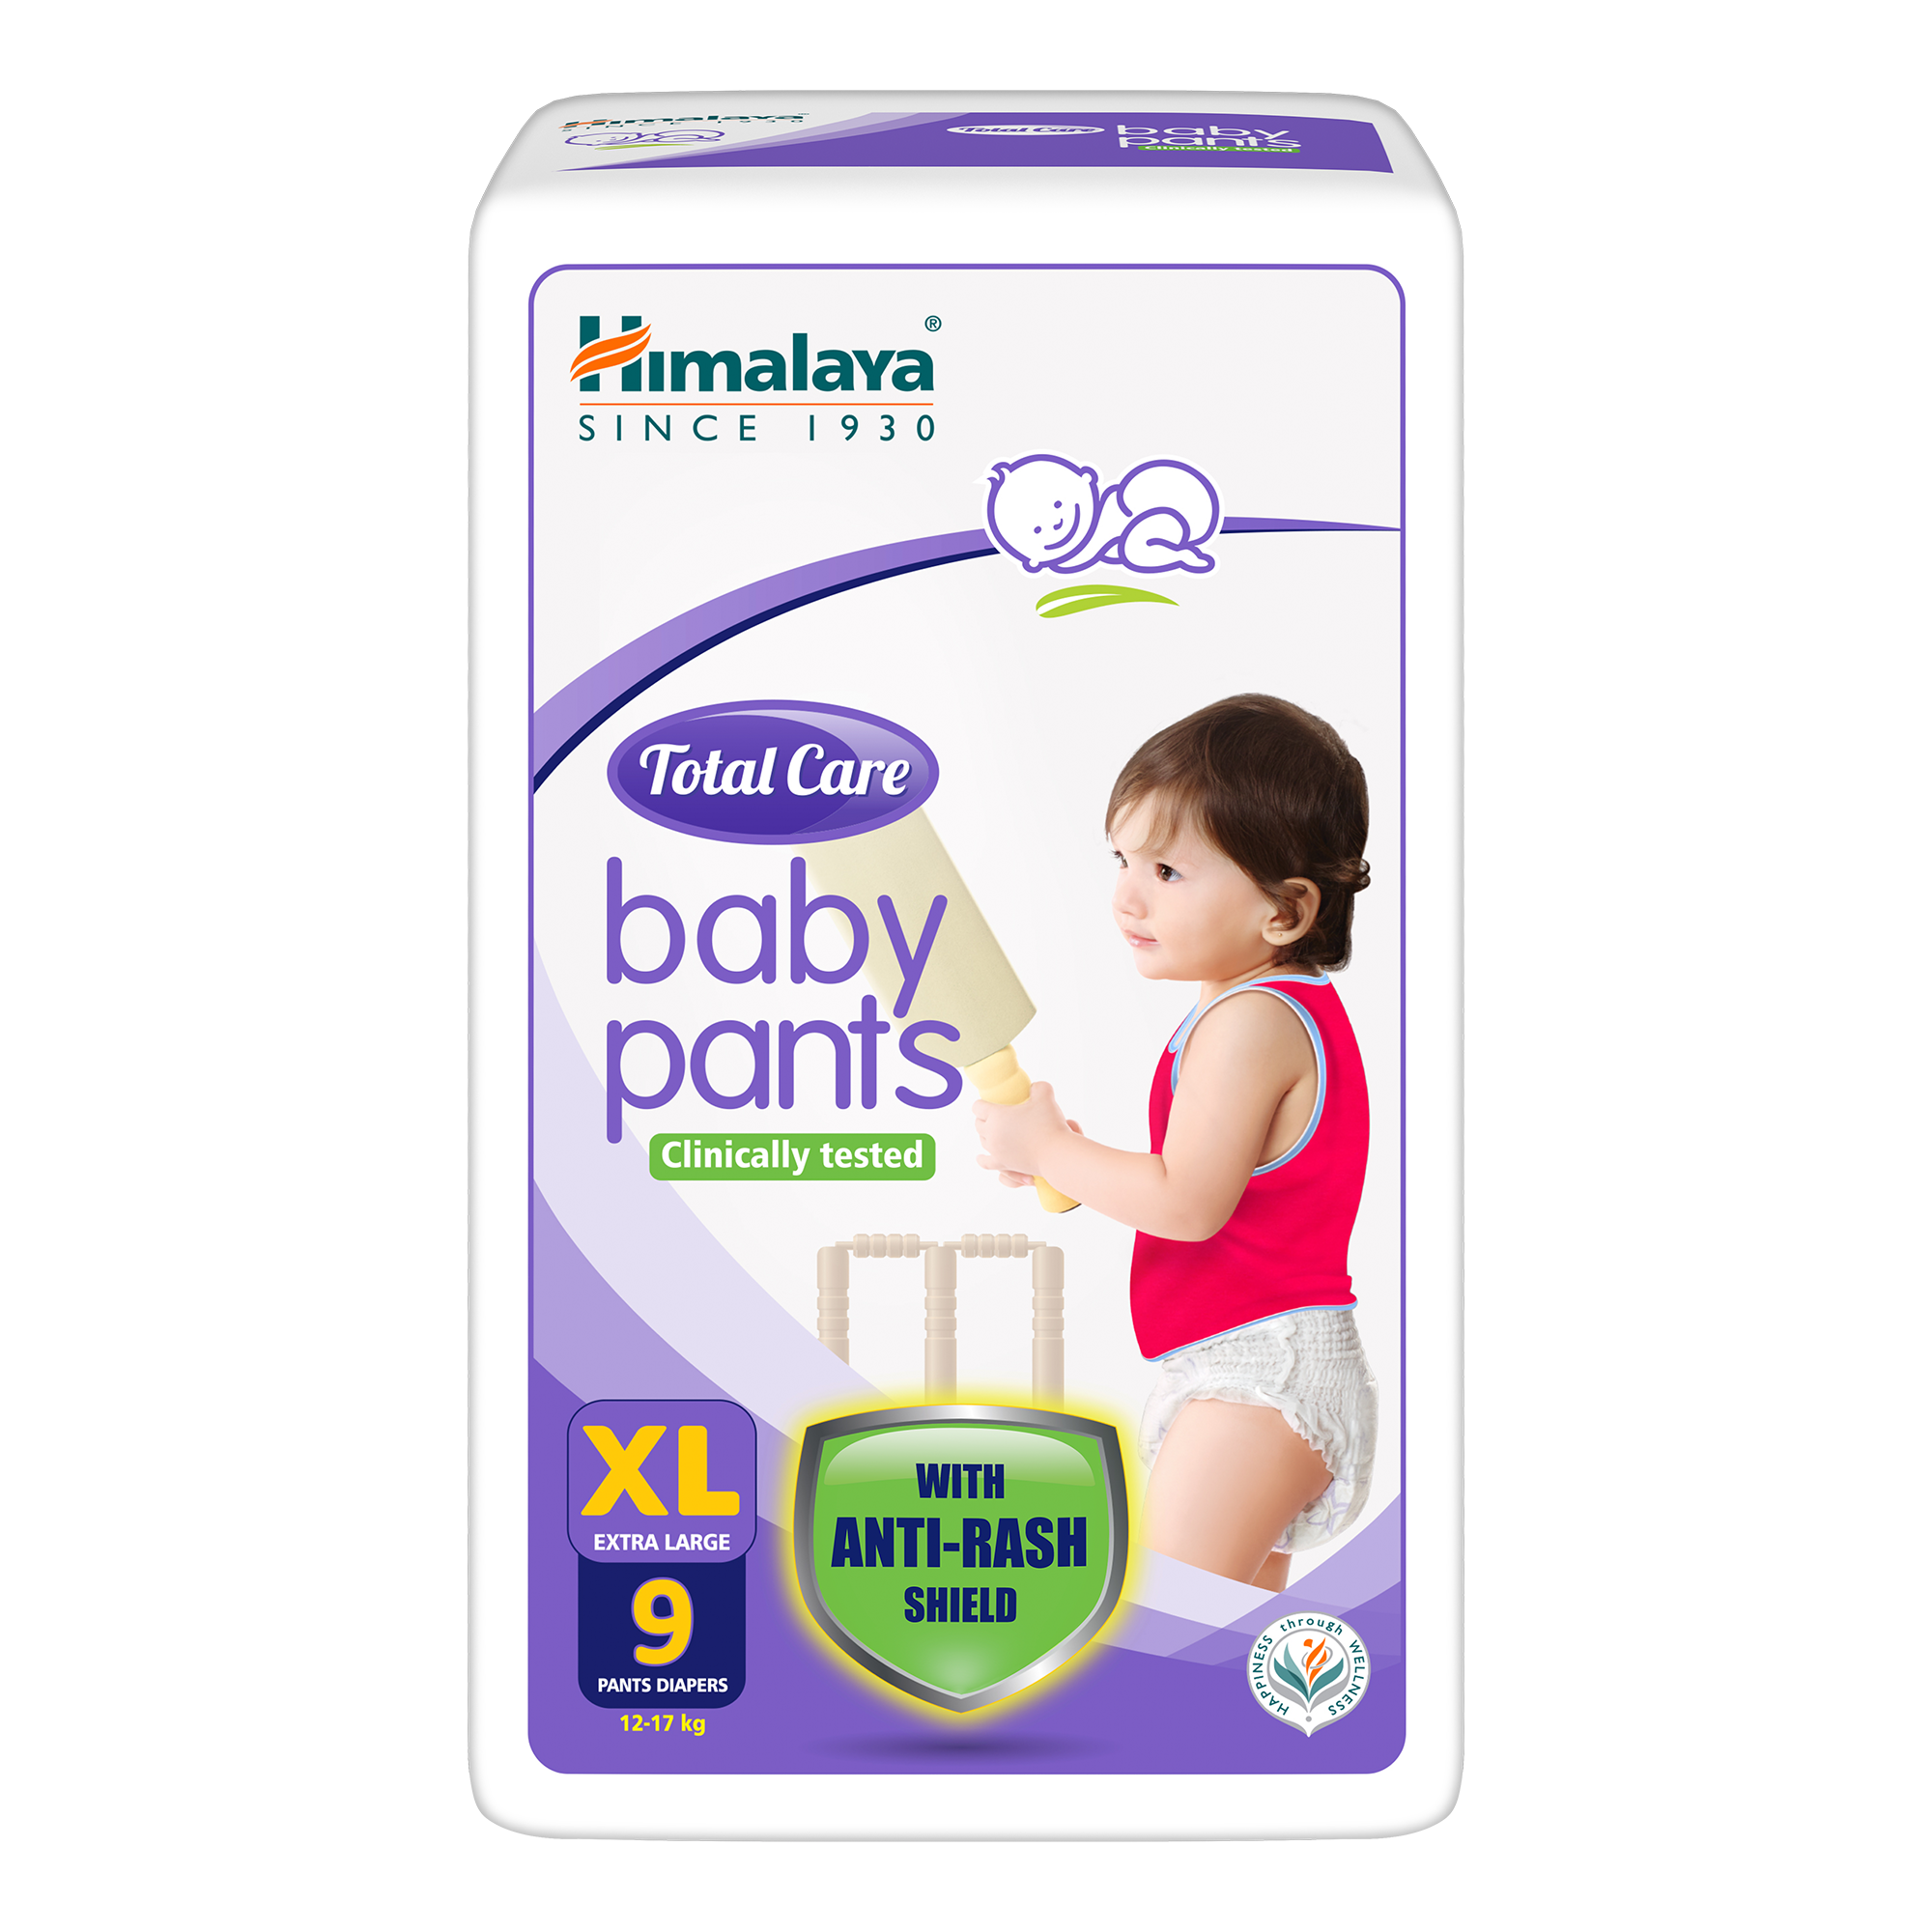 Buy Himalaya Total Care Baby Pants Diapers, Medium (7-12 kg), 54 Count &  Gentle Baby Soap (4N*75g) & Baby Lotion 700ml Online at Low Prices in India  - Amazon.in